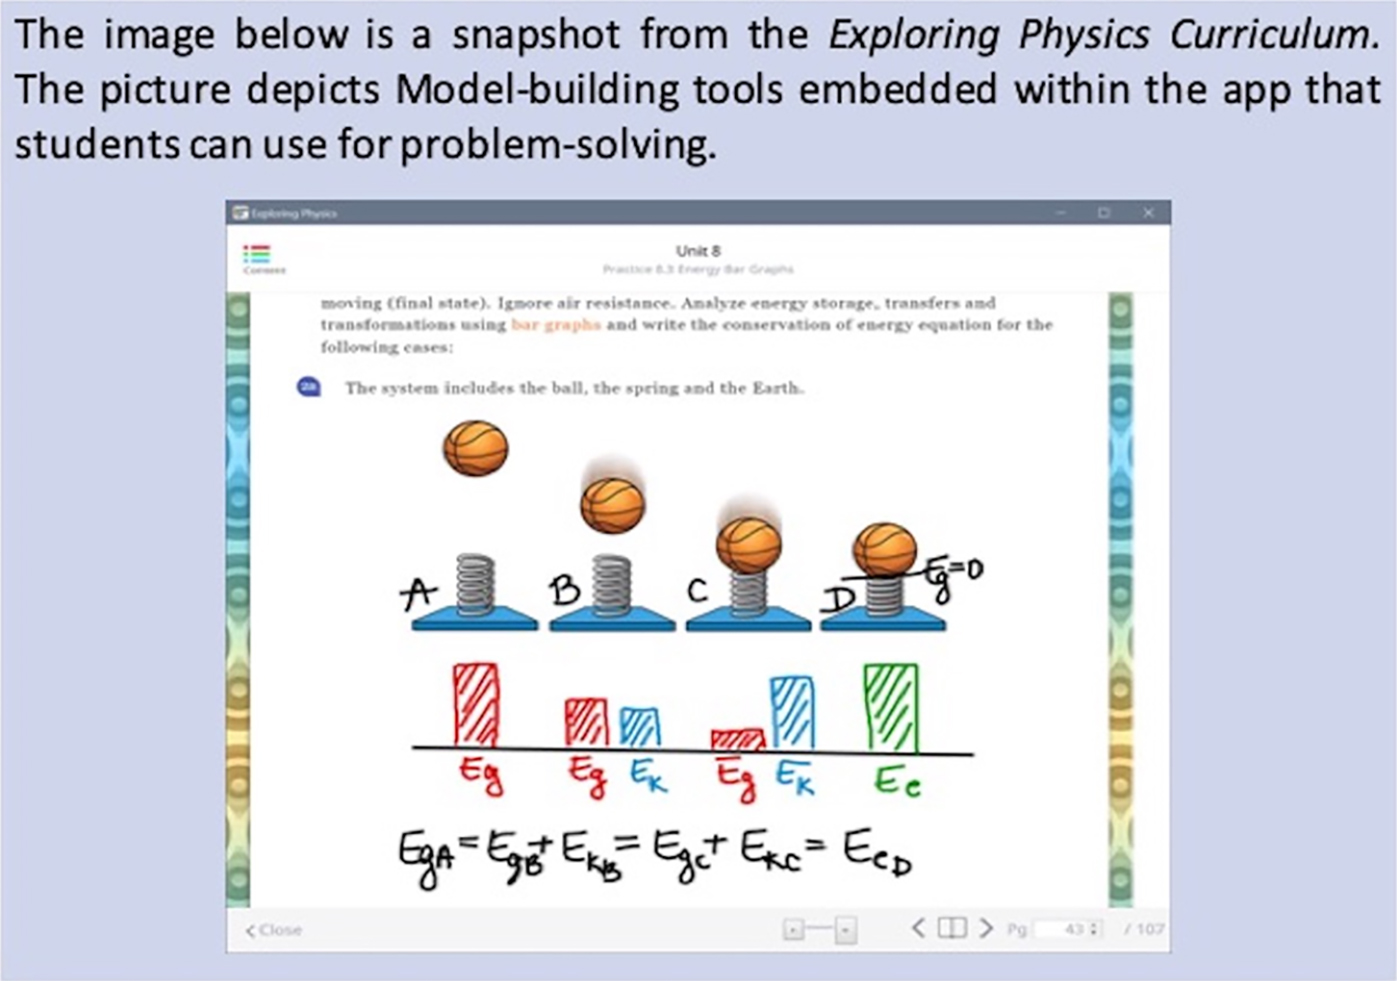 A snapshot of the tools in the Exploring Physics app.